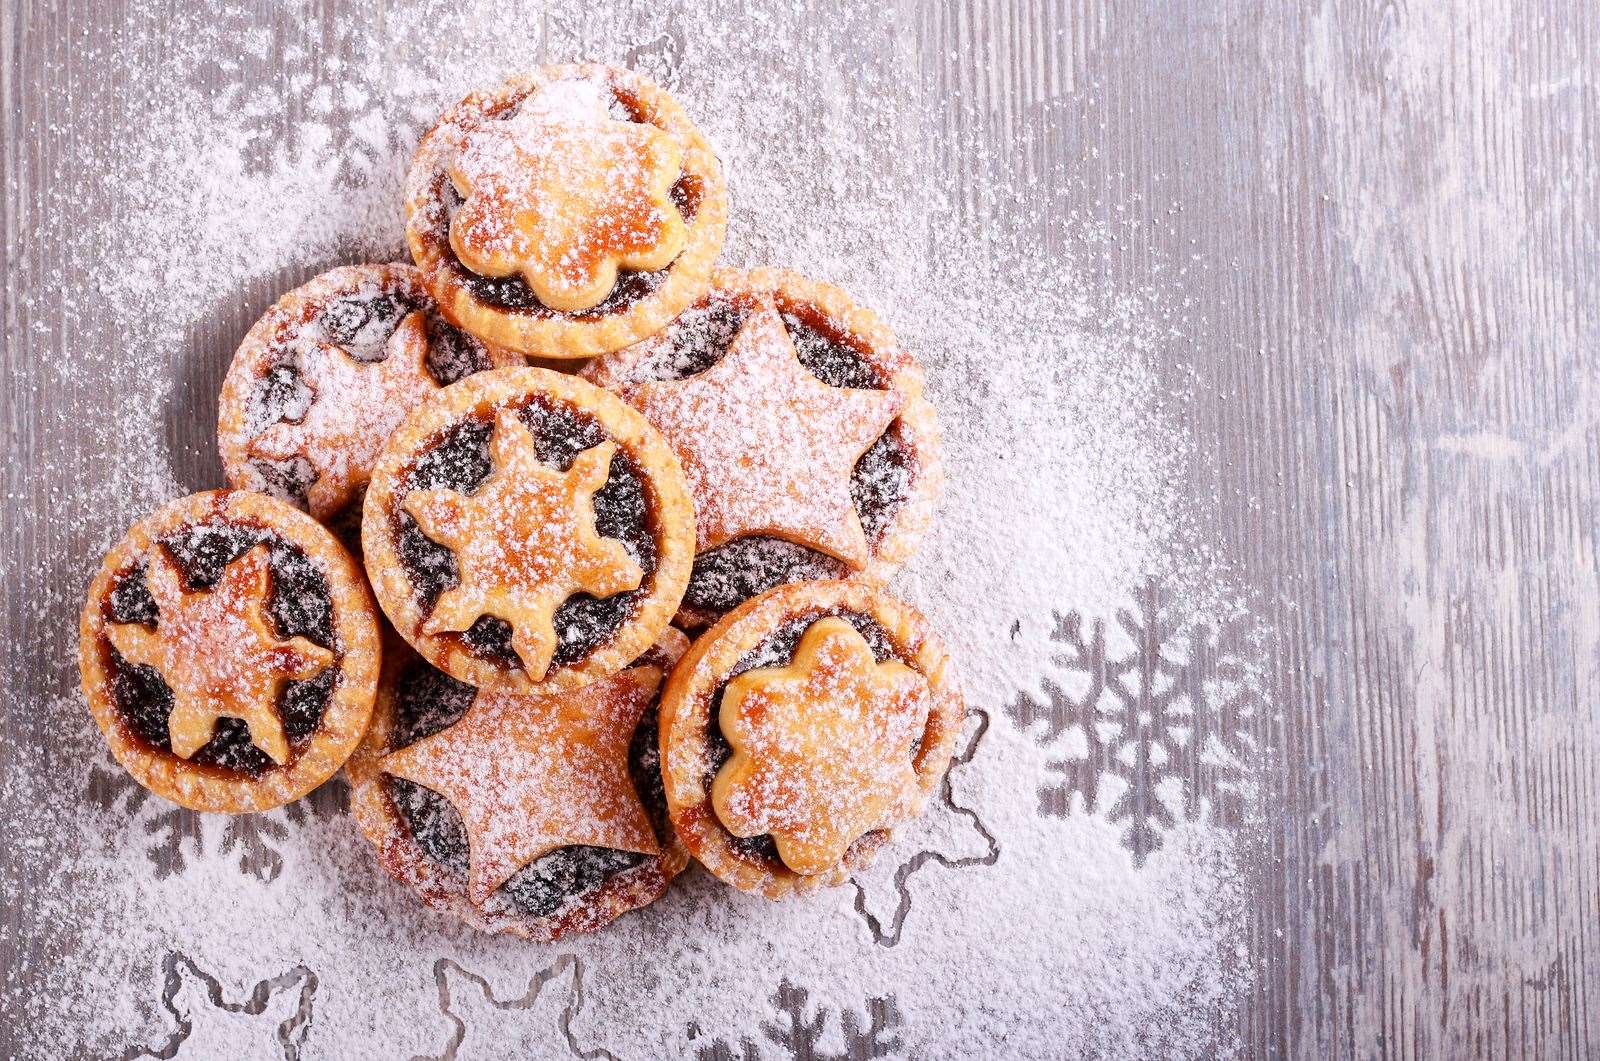 Raisins are often a key ingredient in mince pies, Christmas cake and Christmas pudding but these are potentially extremely toxic to dogs